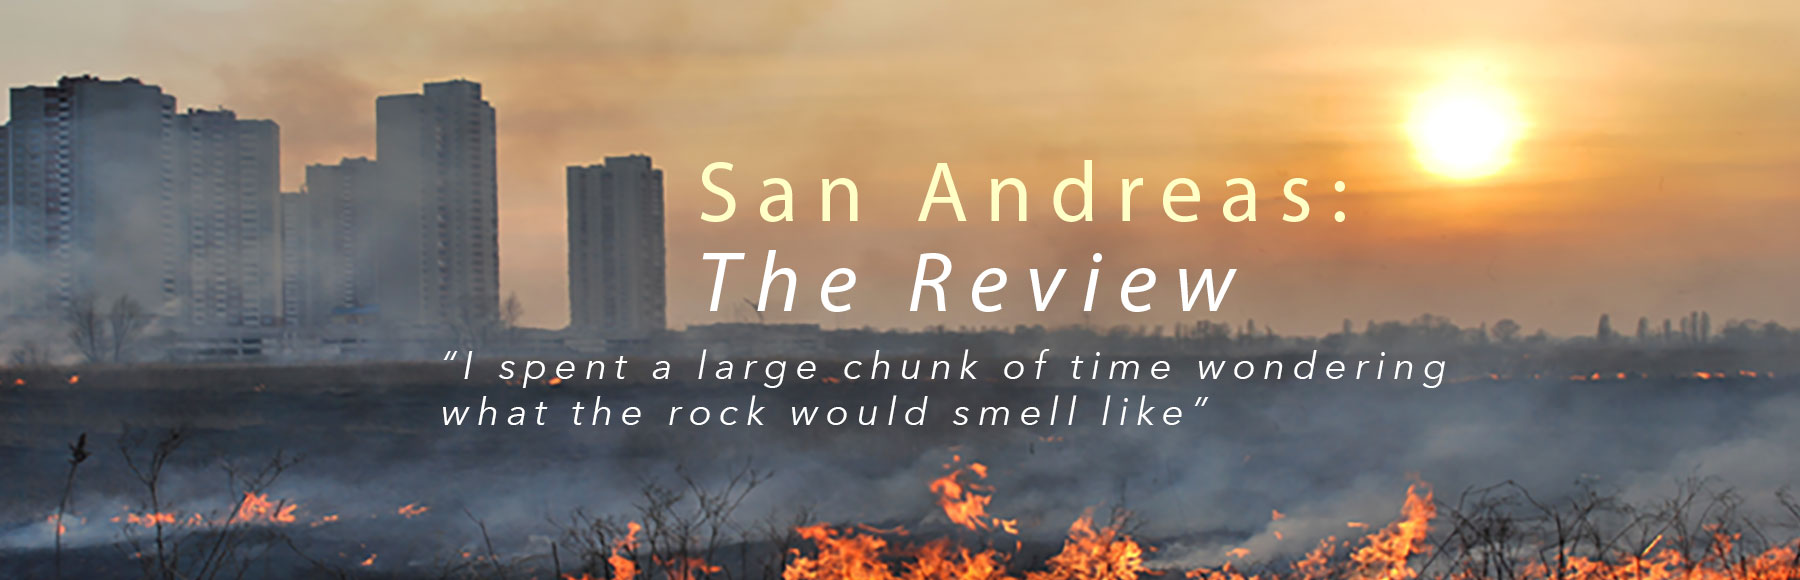 San Andreas: The review